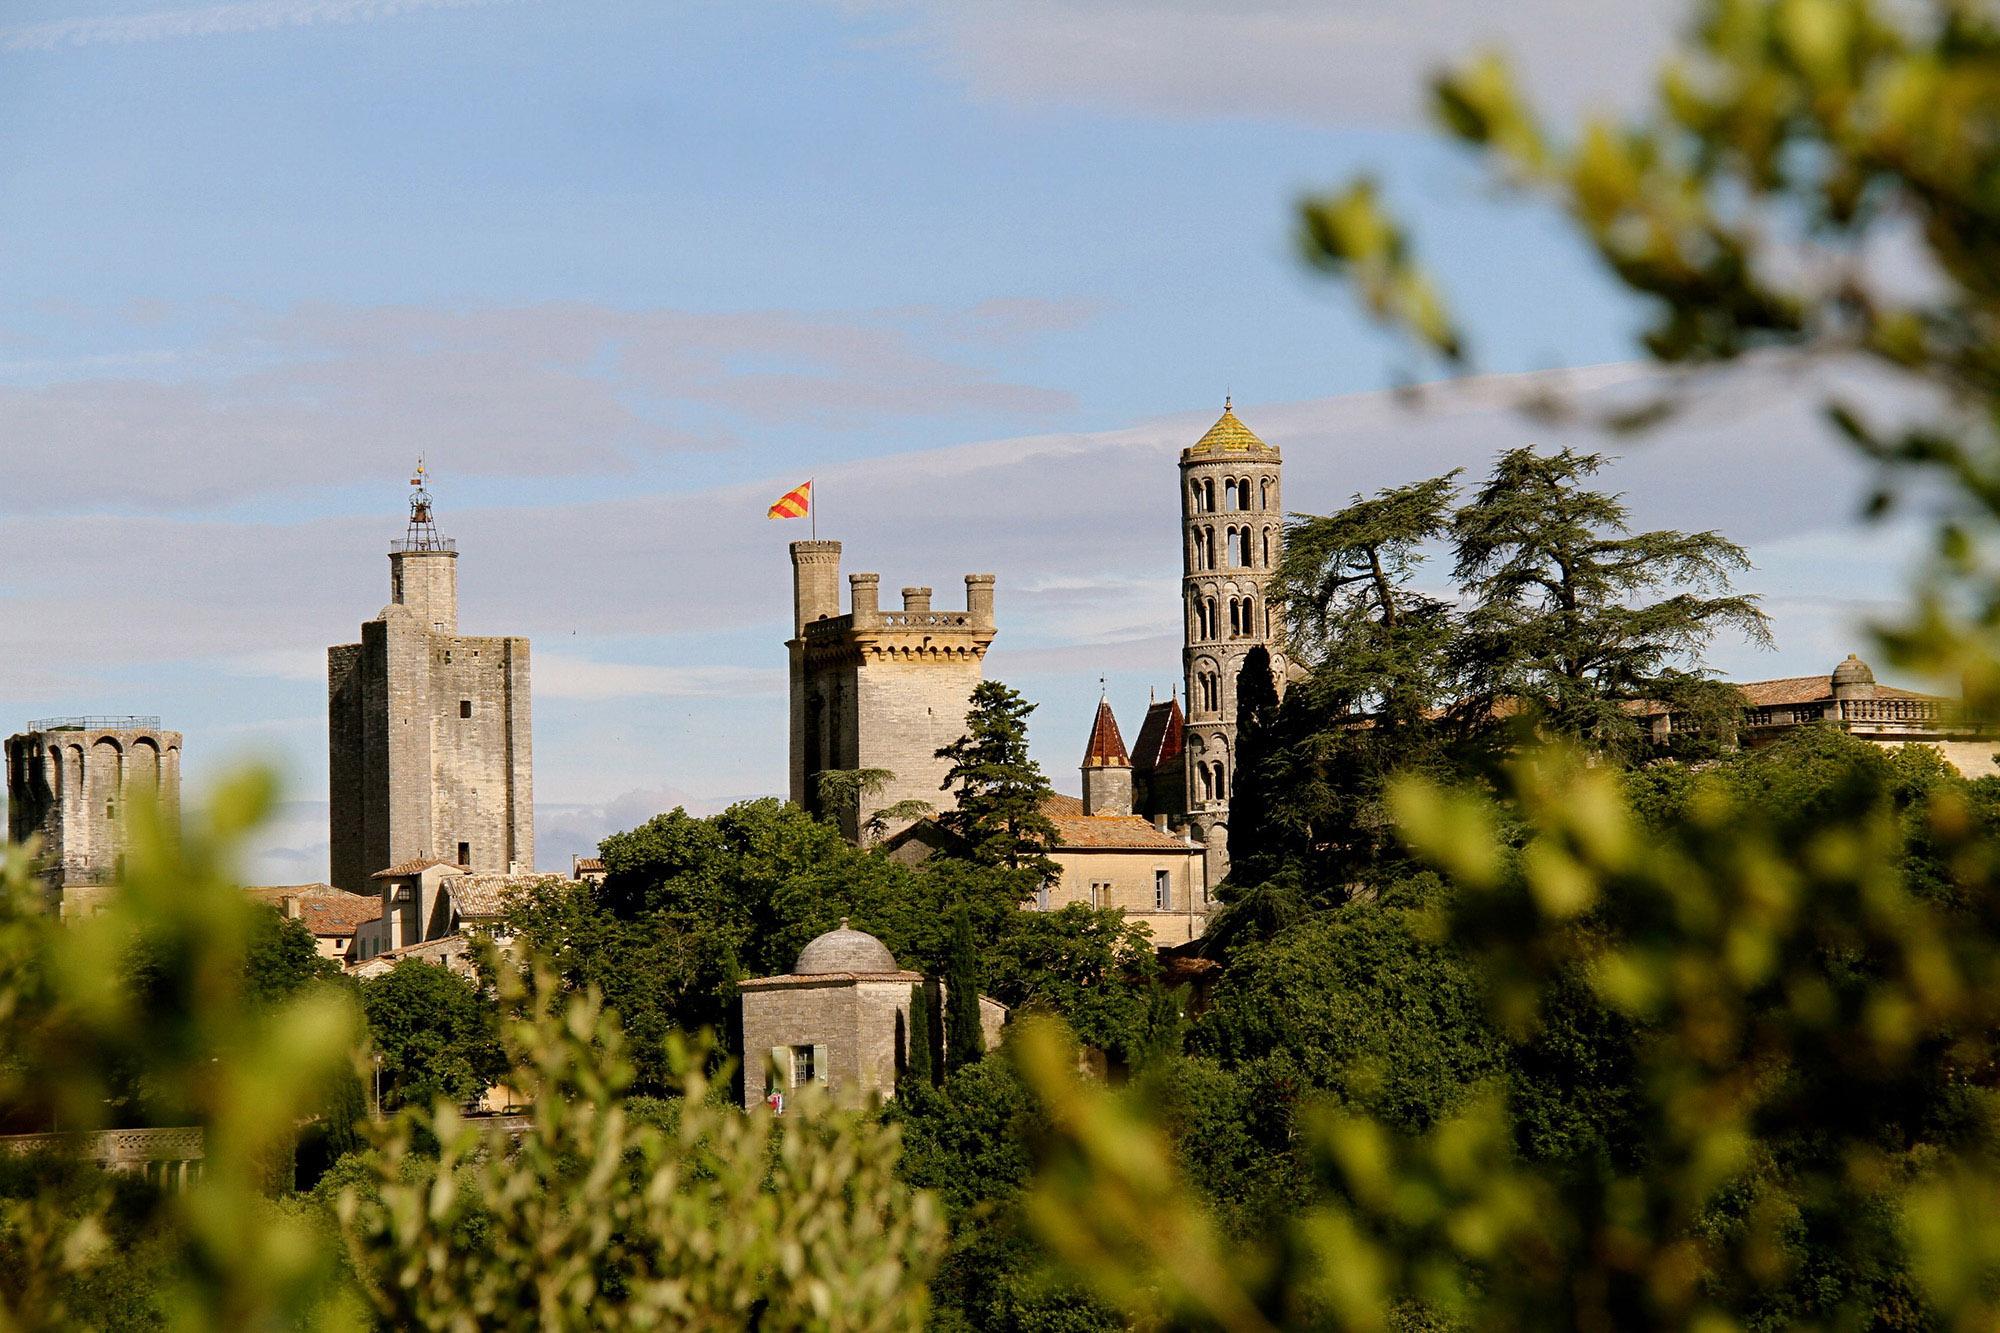 Uzès' three feudal towers. From left to right: the King's tower, the Bishop's tower, Bermonde tower (Duchy's keep) and the Fenestrelle tower. – © City of Uzès